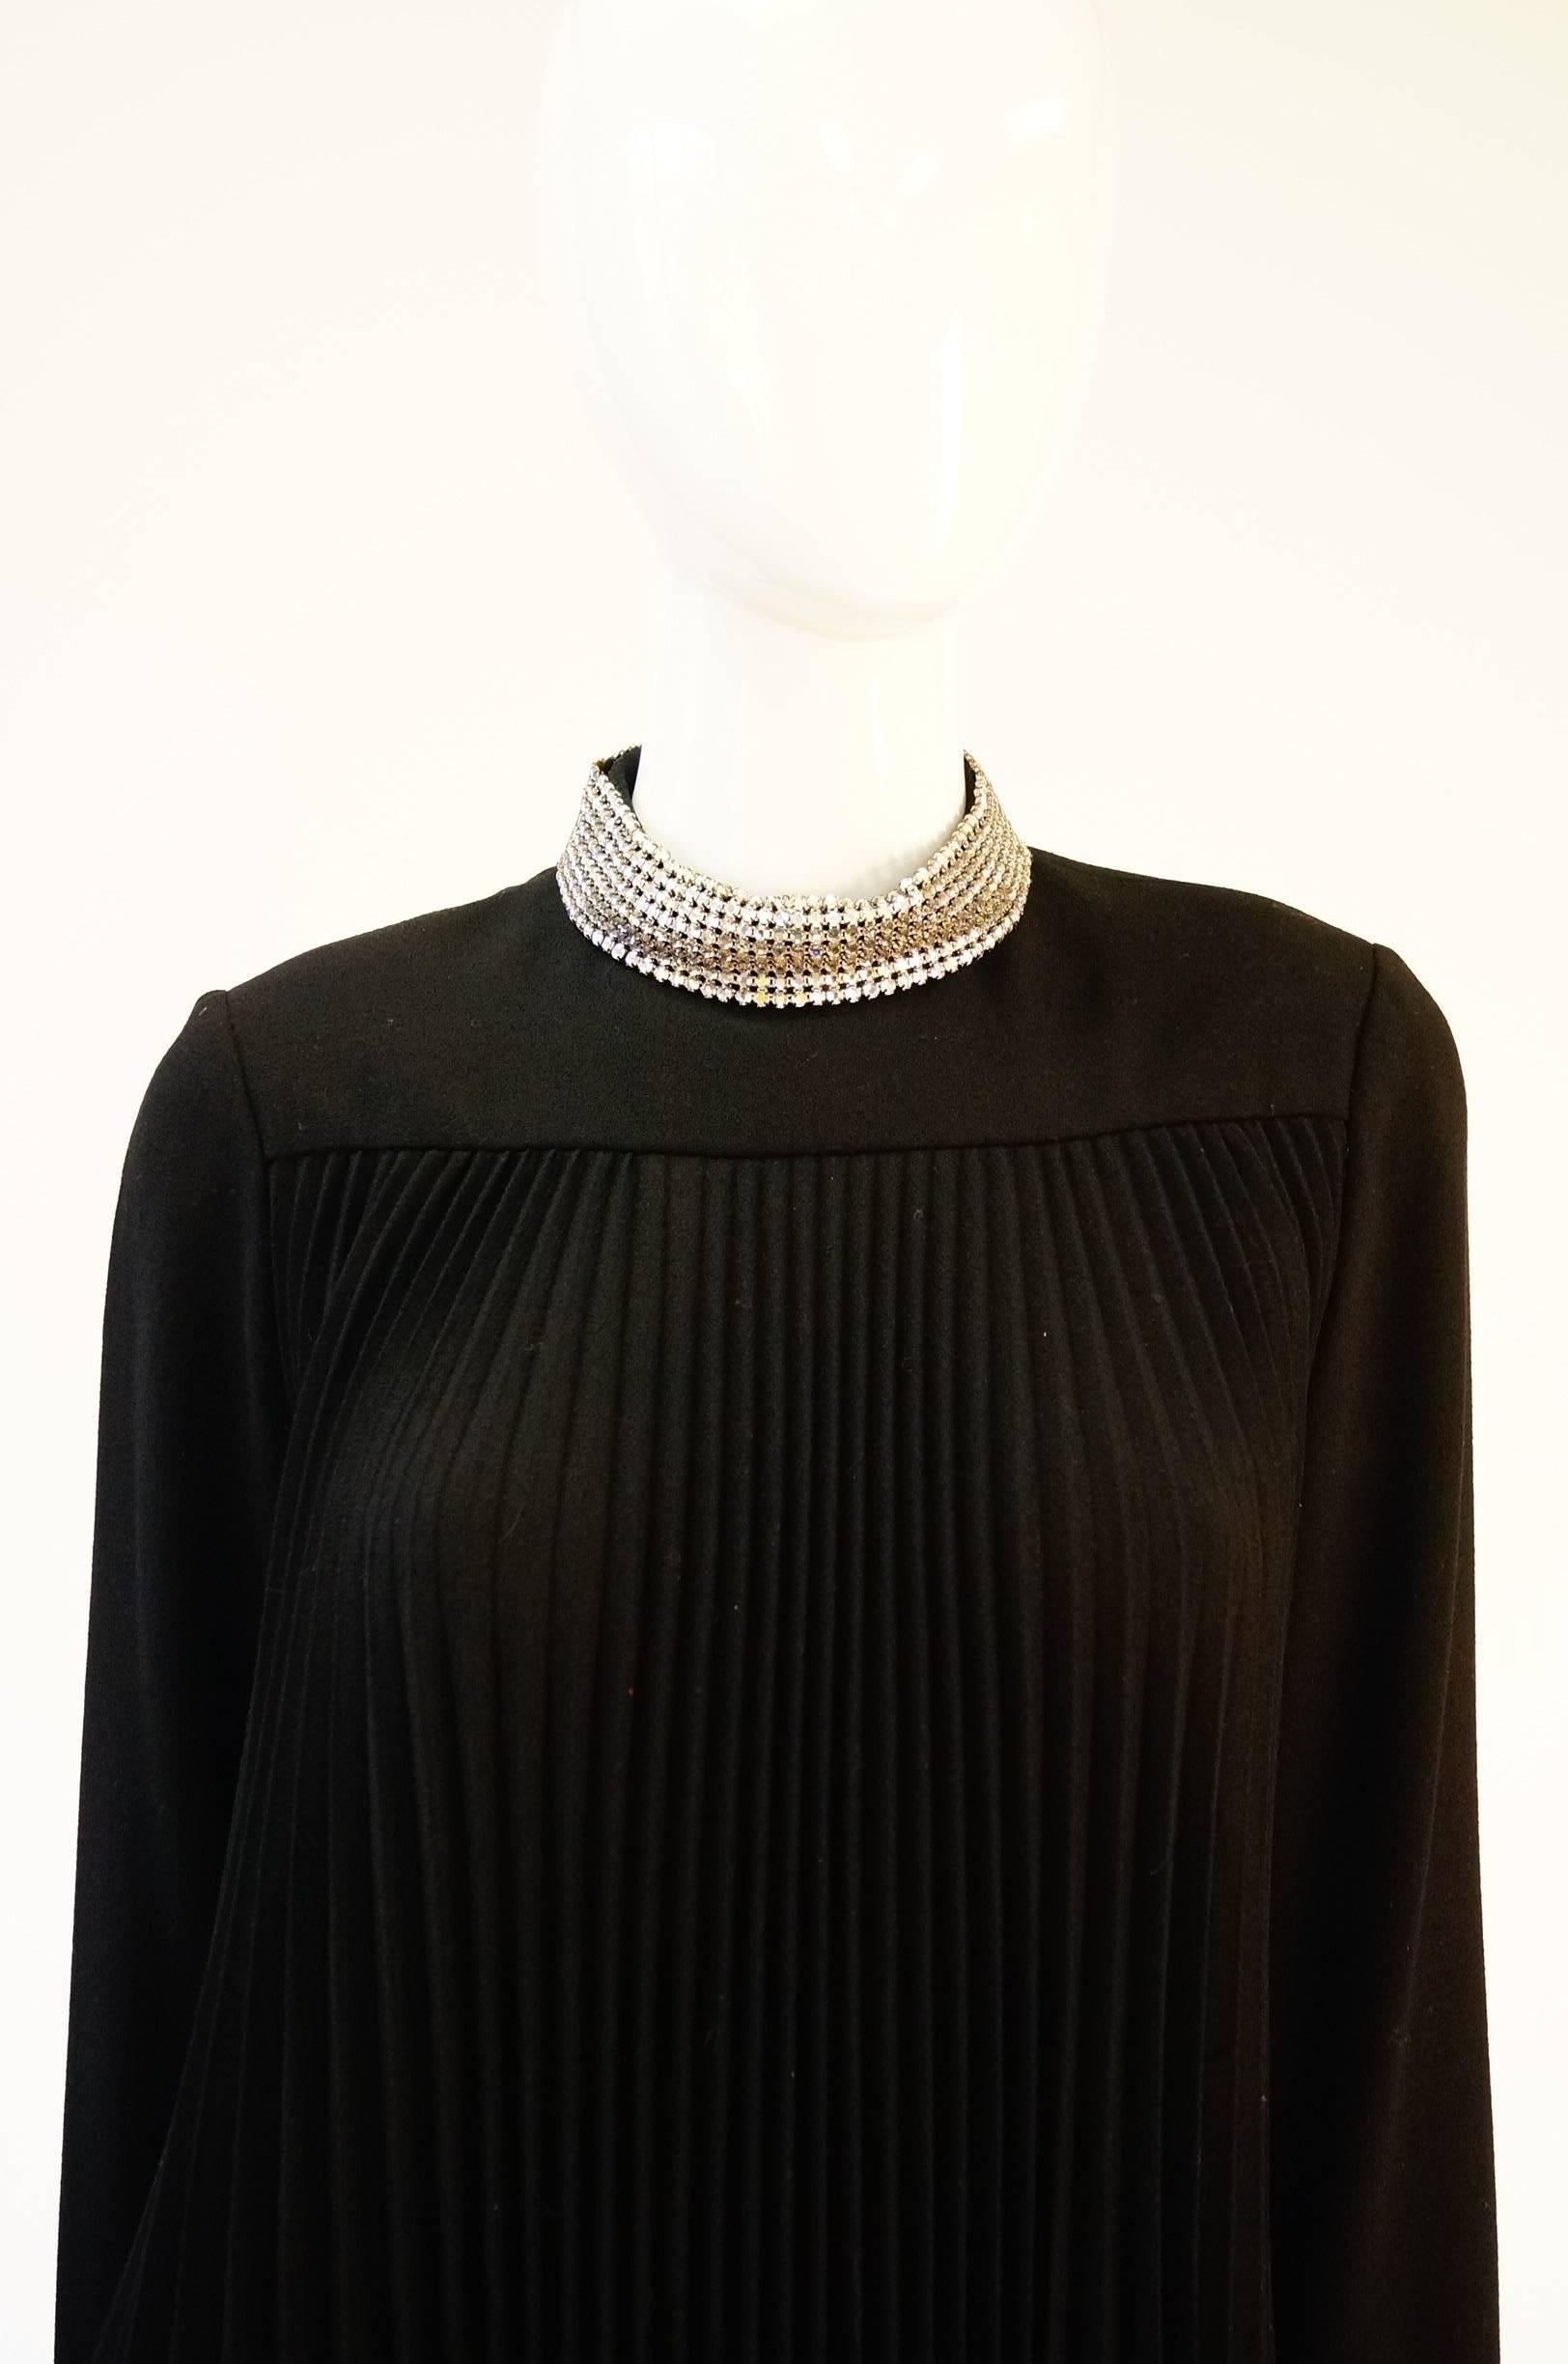 
Elegant 1960s black dress by Teal Traina New York! This graceful knee length black dress has long sleeves with shimmering rhinestone cuffs, and a rhinestone collar. The dress is primarily composed of thin pleats that sway gently with every step.